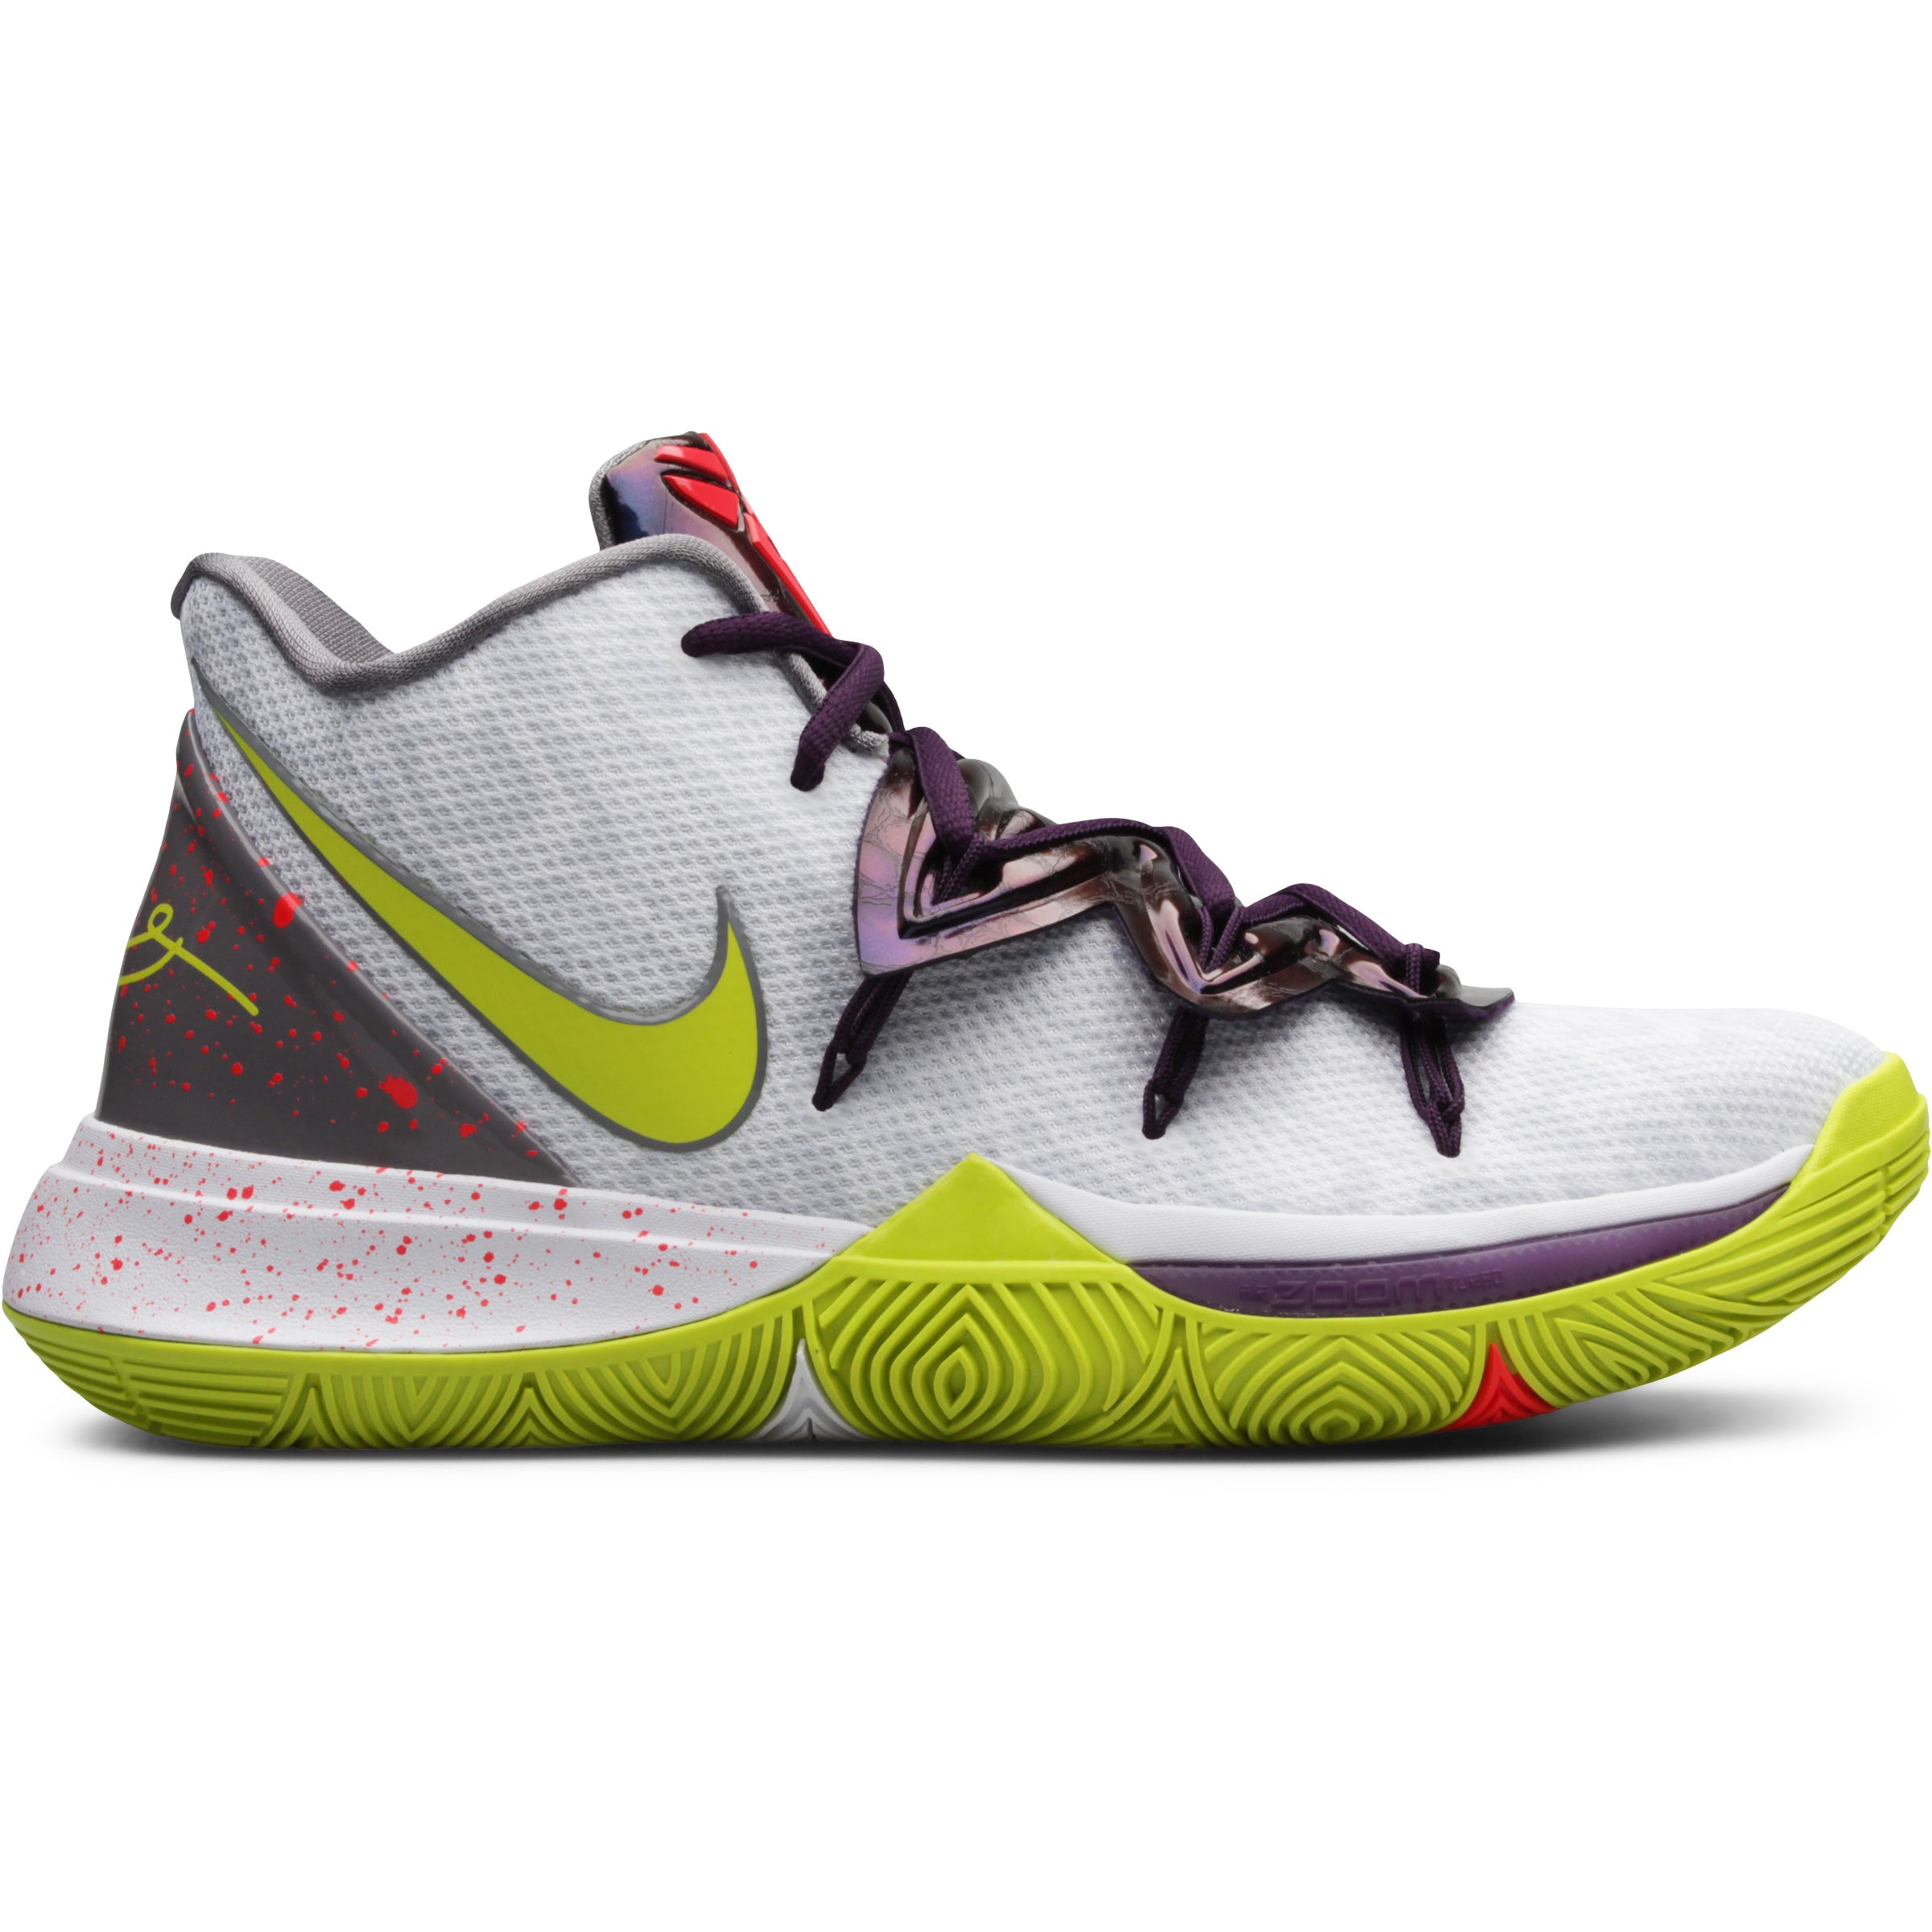 KYRIE 5 OEM BASKETBALL SHOES FOR MEN PURPLE